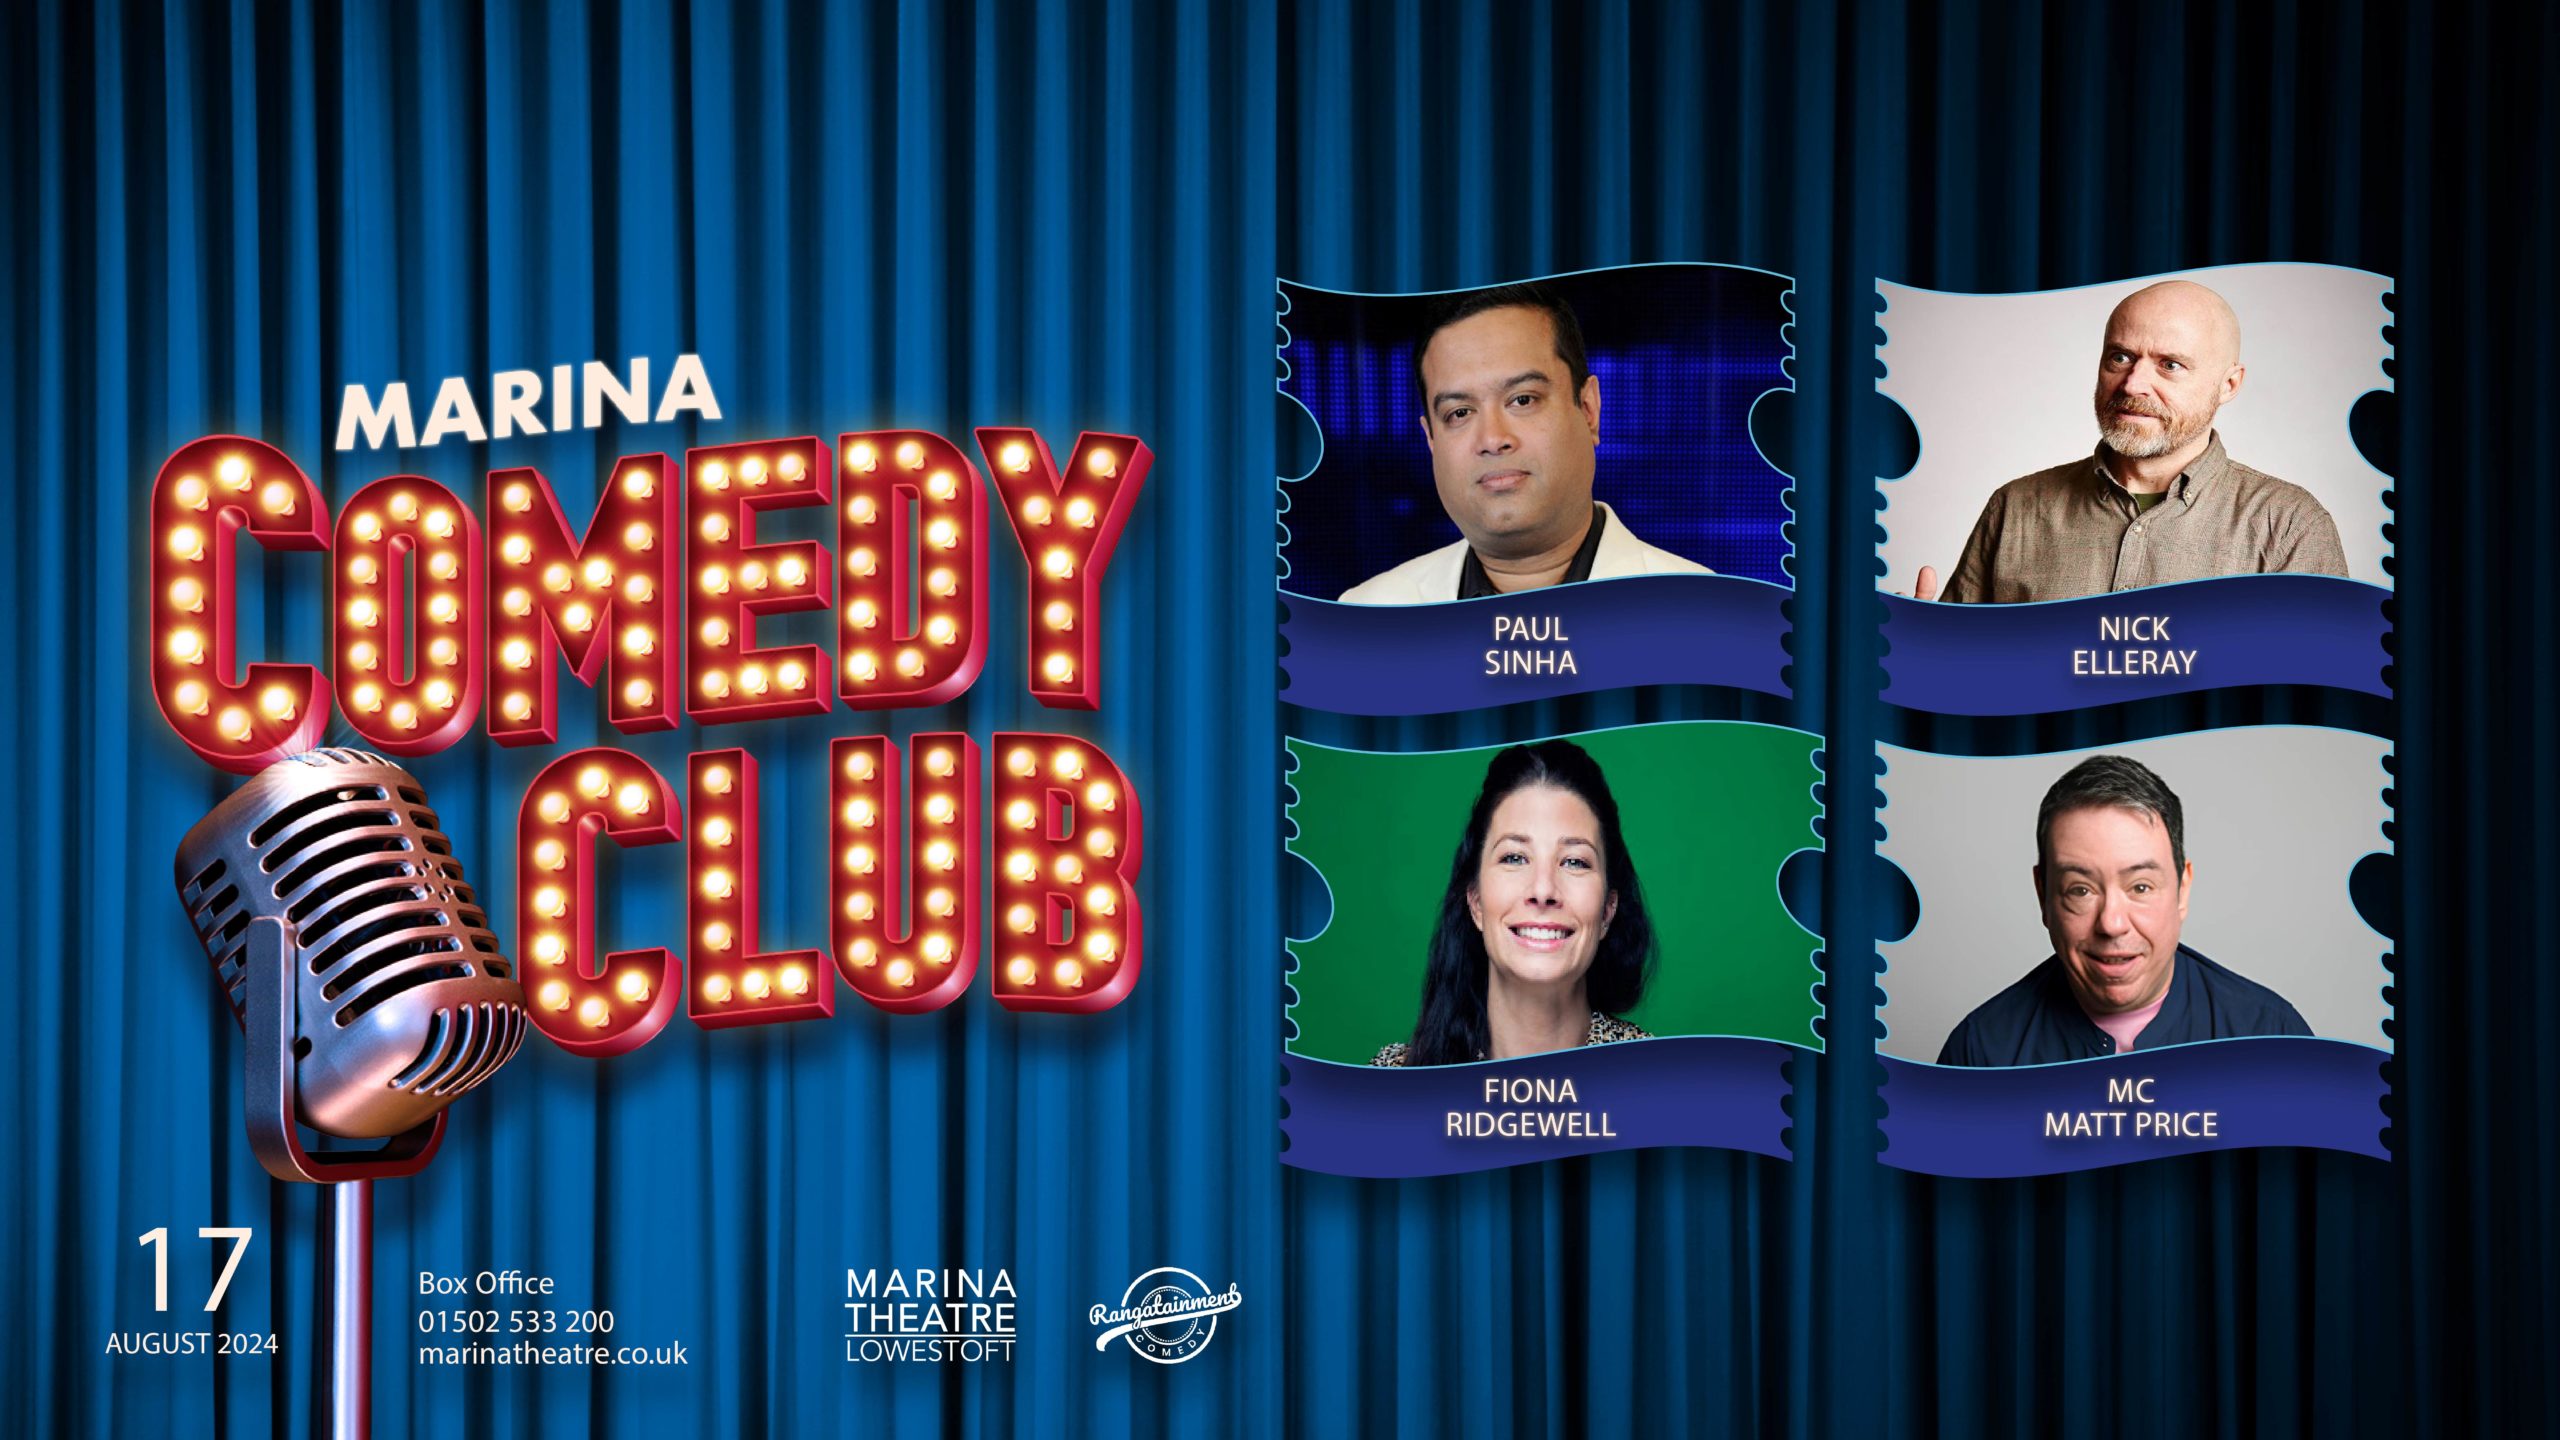 The Chase Star to headline August Marina Comedy Club